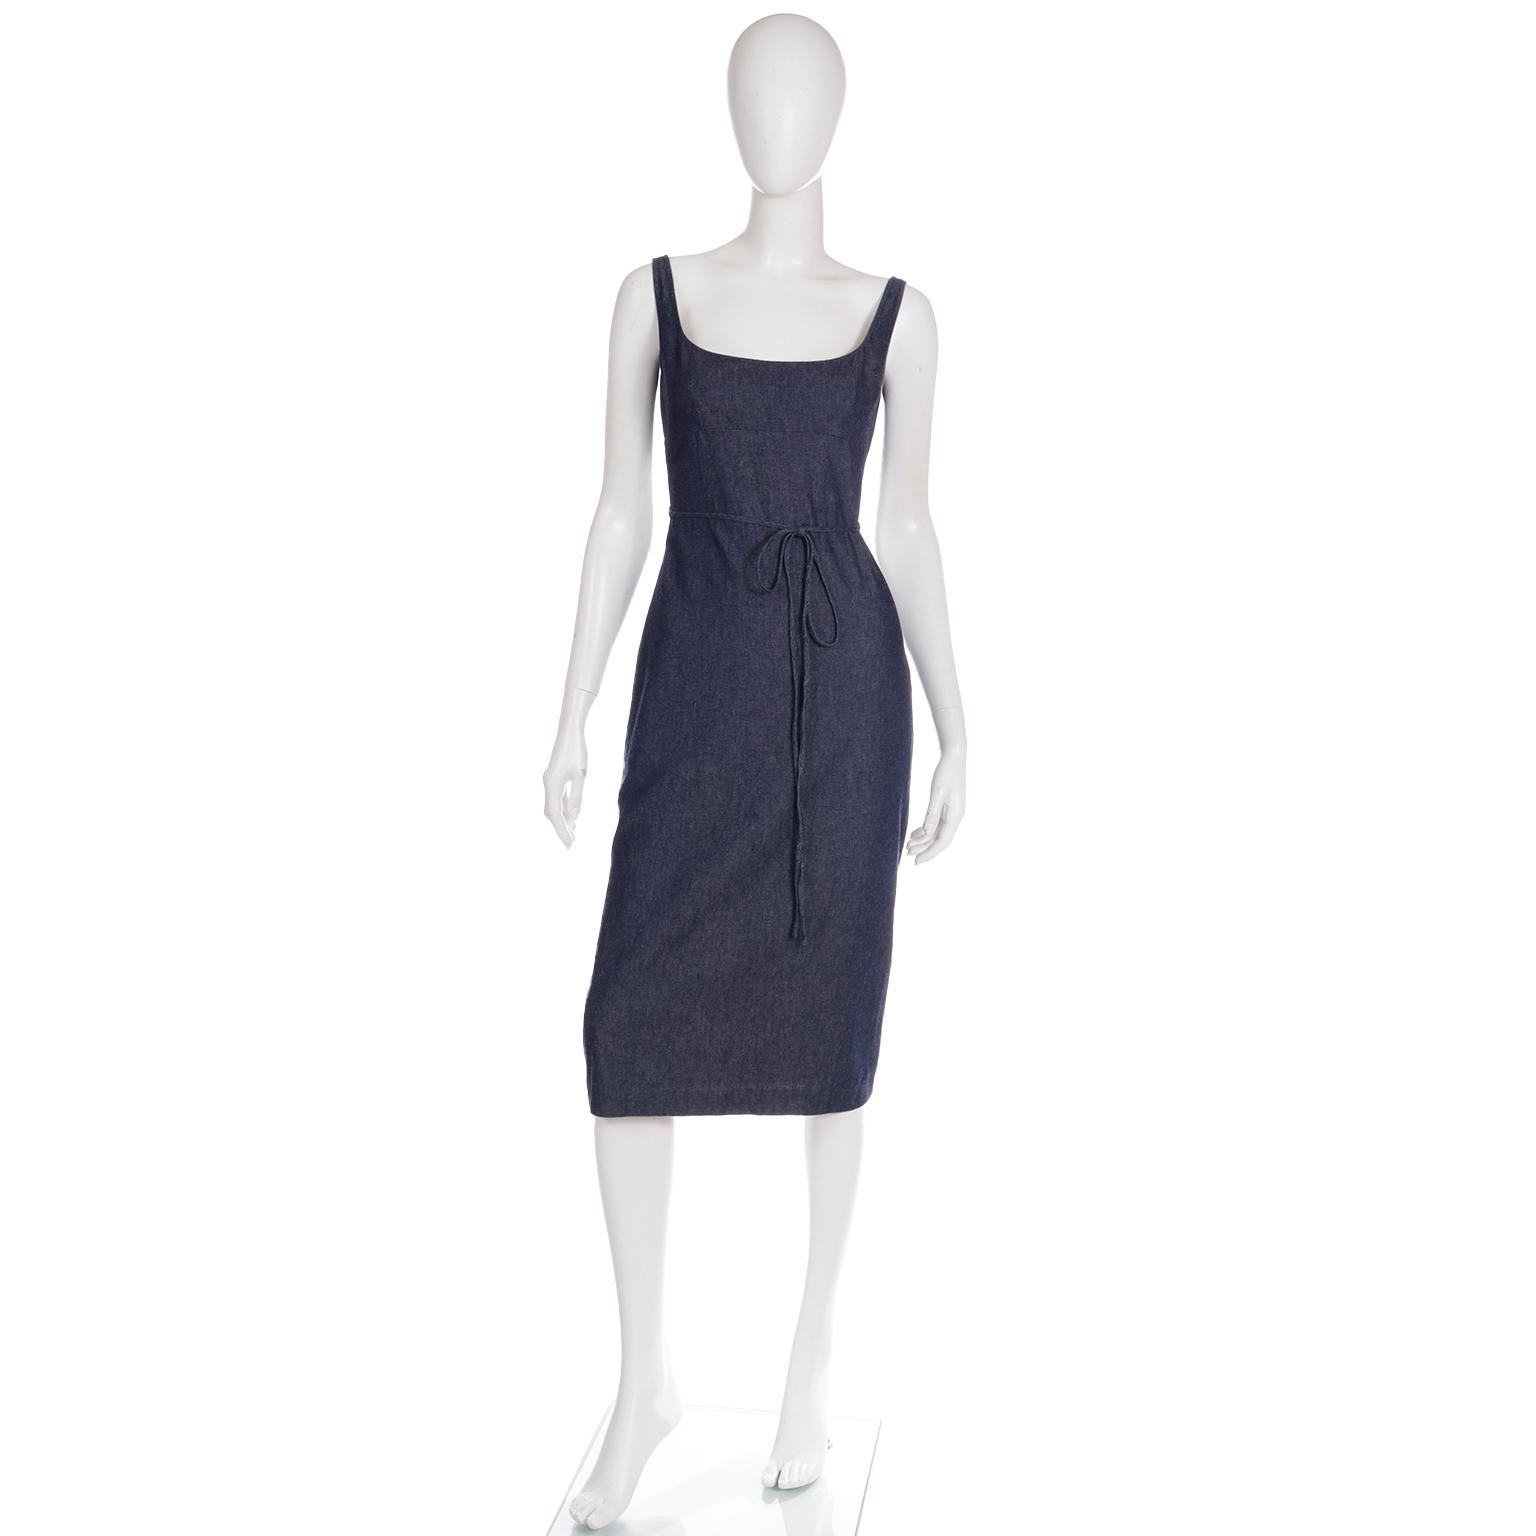 This is a great vintage early 2000's Richard Tyler Collection dark blue denim dress that 	wraps around and ties in the front. The dress has open areas in the back, making it much more interesting, a signature element in many Richard Tyler dresses.